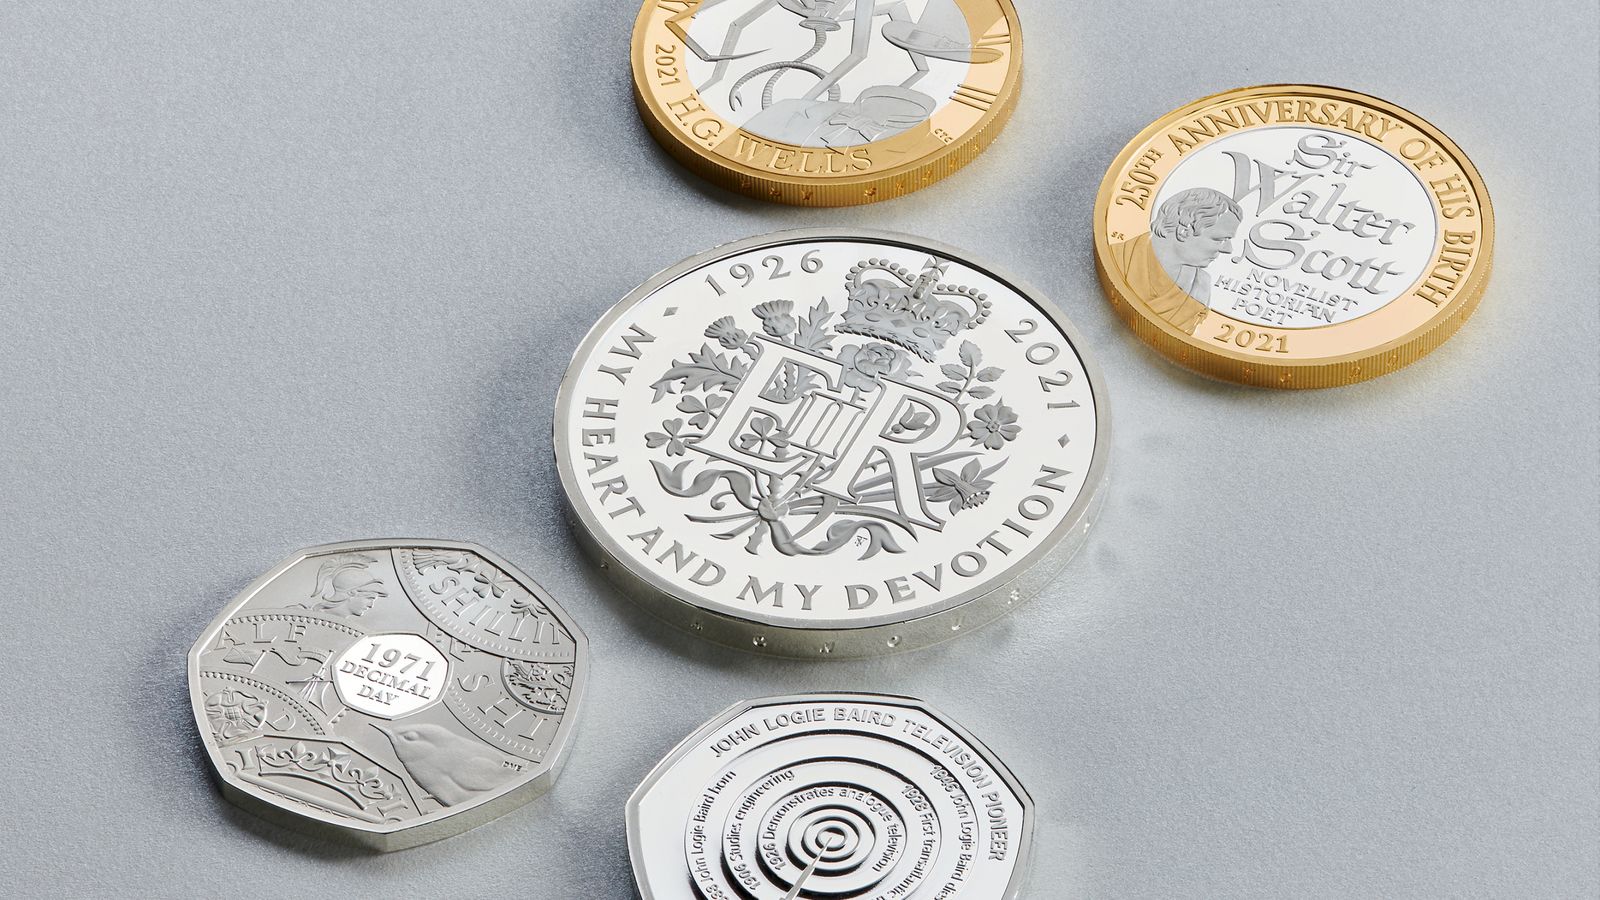 Queen’s 95th birthday to be marked by new coin